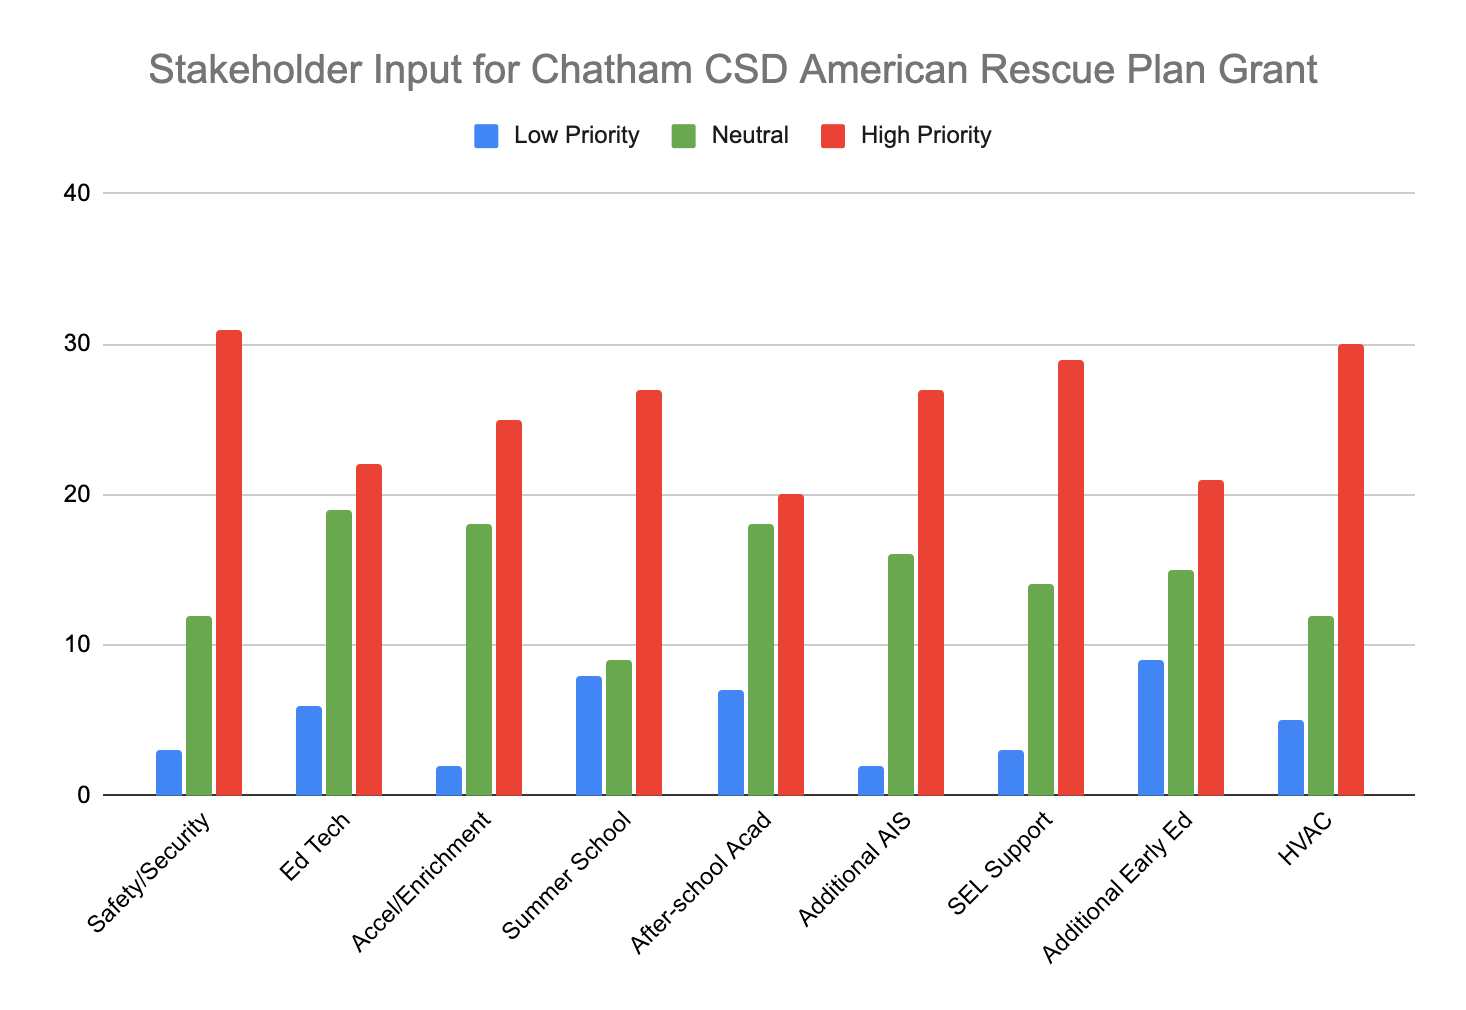 Graph showing stakeholder input for Chatham CSD American Rescue Plan Grant showing nine categories and the number of stakeholders who rated each category as low priority, neutral, or high priority, as follows.  Safety/Security: 3 Low Priority 12 Neutral 31 High Priority.  Ed Tech: 6 Low Priority 19 Neutral 22 High Priority.  Accel/Enrichment: 2 Low Priority 18 Neutral 25 High Priority.  Summer School: 8 Low Priority 9 Neutral 27 High Priority.  After-school Acad: 7 Low Priority 18 Neutral 20 High Priority.  Additional AIS: 2 Low Priority 16 Neutral 27 High Priority.  SEL Support: 3 Low Priority 14 Neutral 29 High Priority.  Additional Early Ed: 9 Low Priority 15 Neutral 21 High Priority.  HVAC: 5 Low Priority 12 Neutral 30 High Priority.